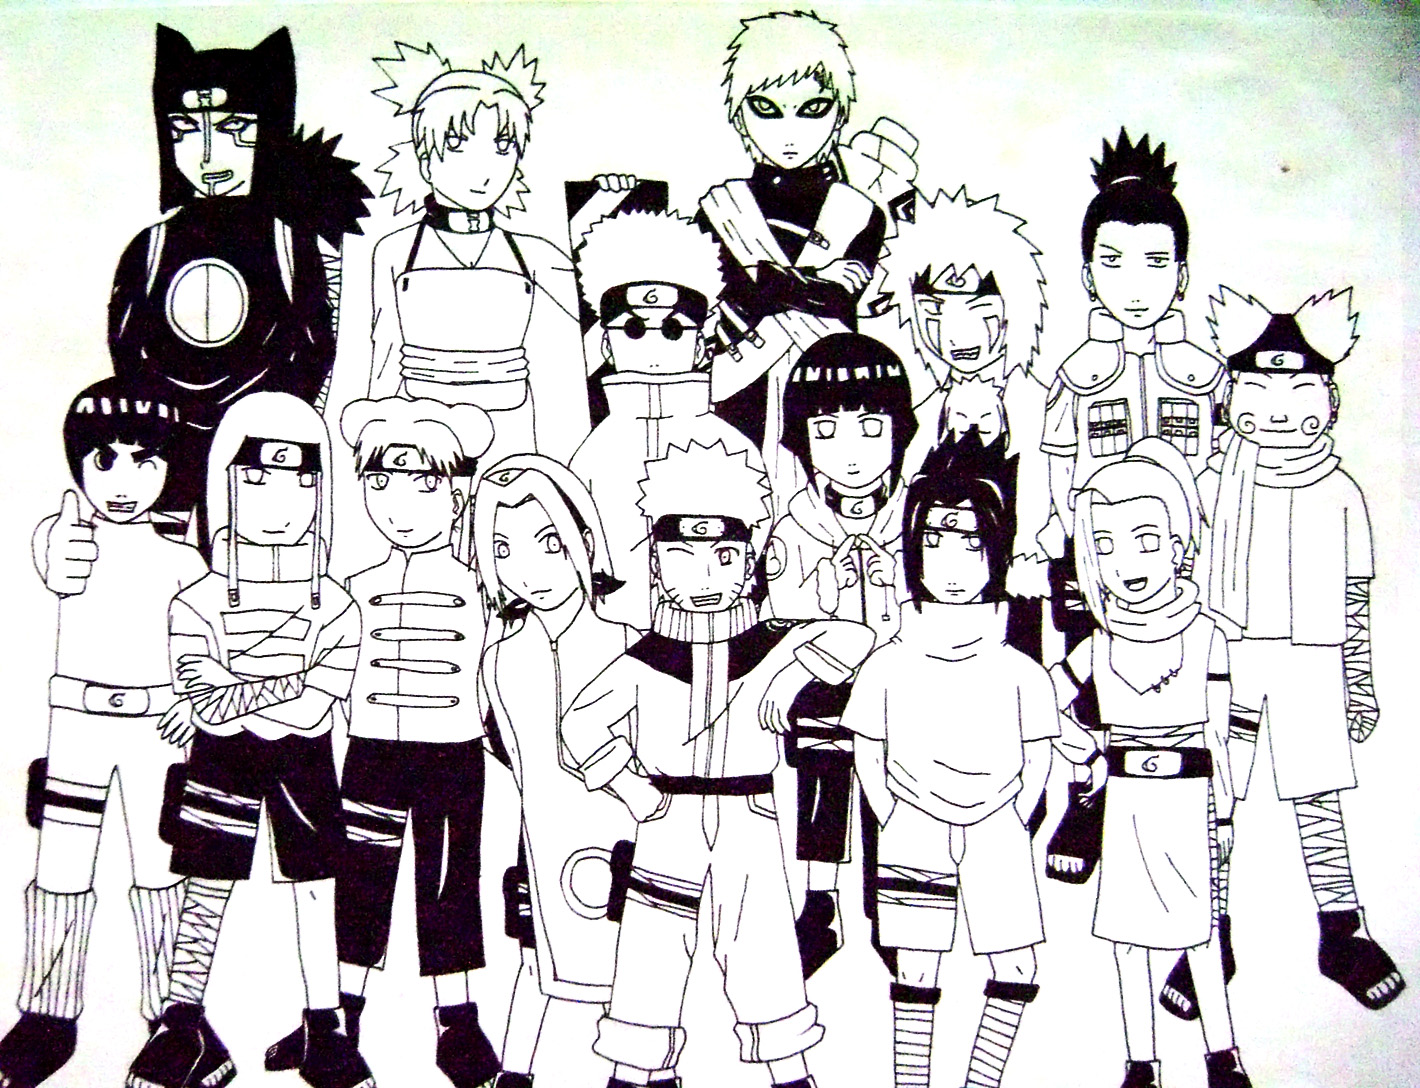 B&amp;W naruto by siLent3